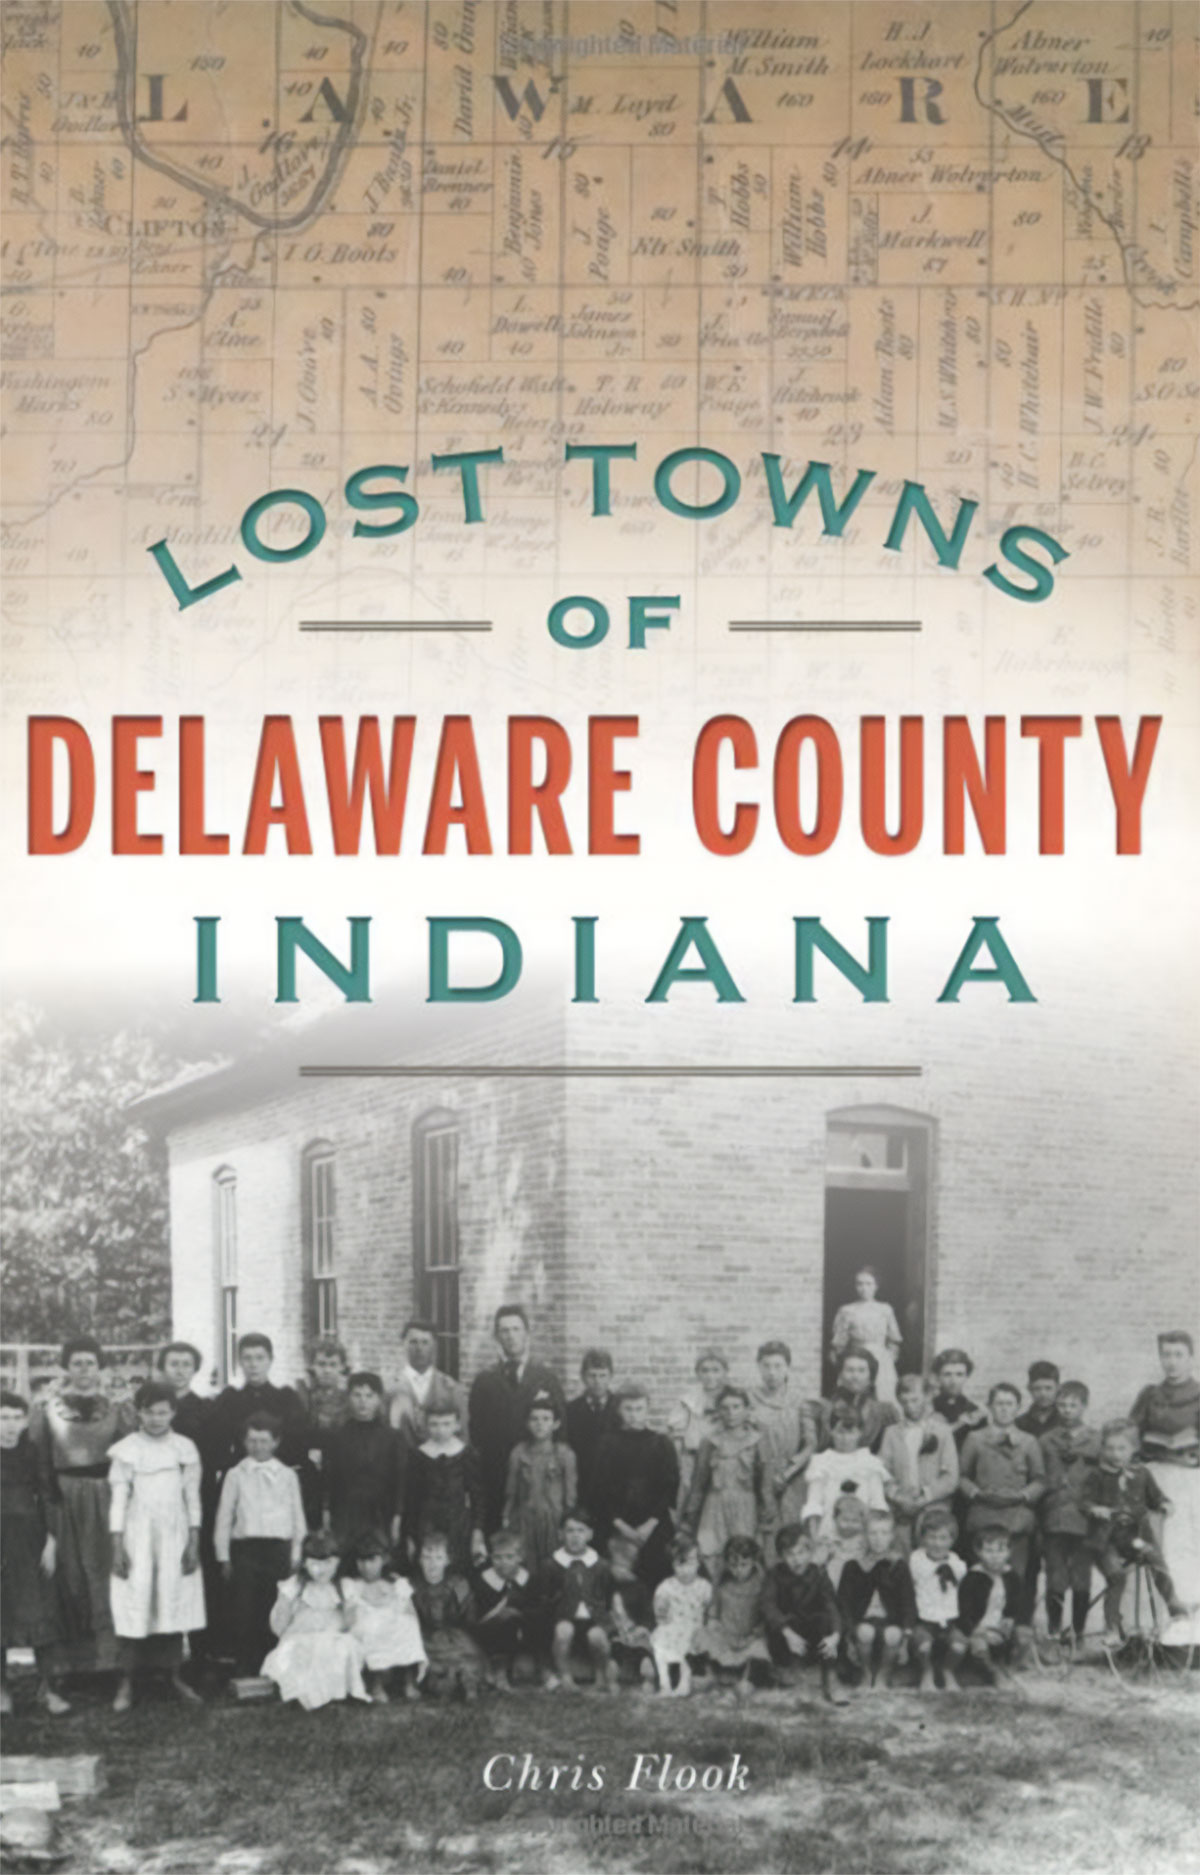 Lost Towns of Delaware County, Indiana